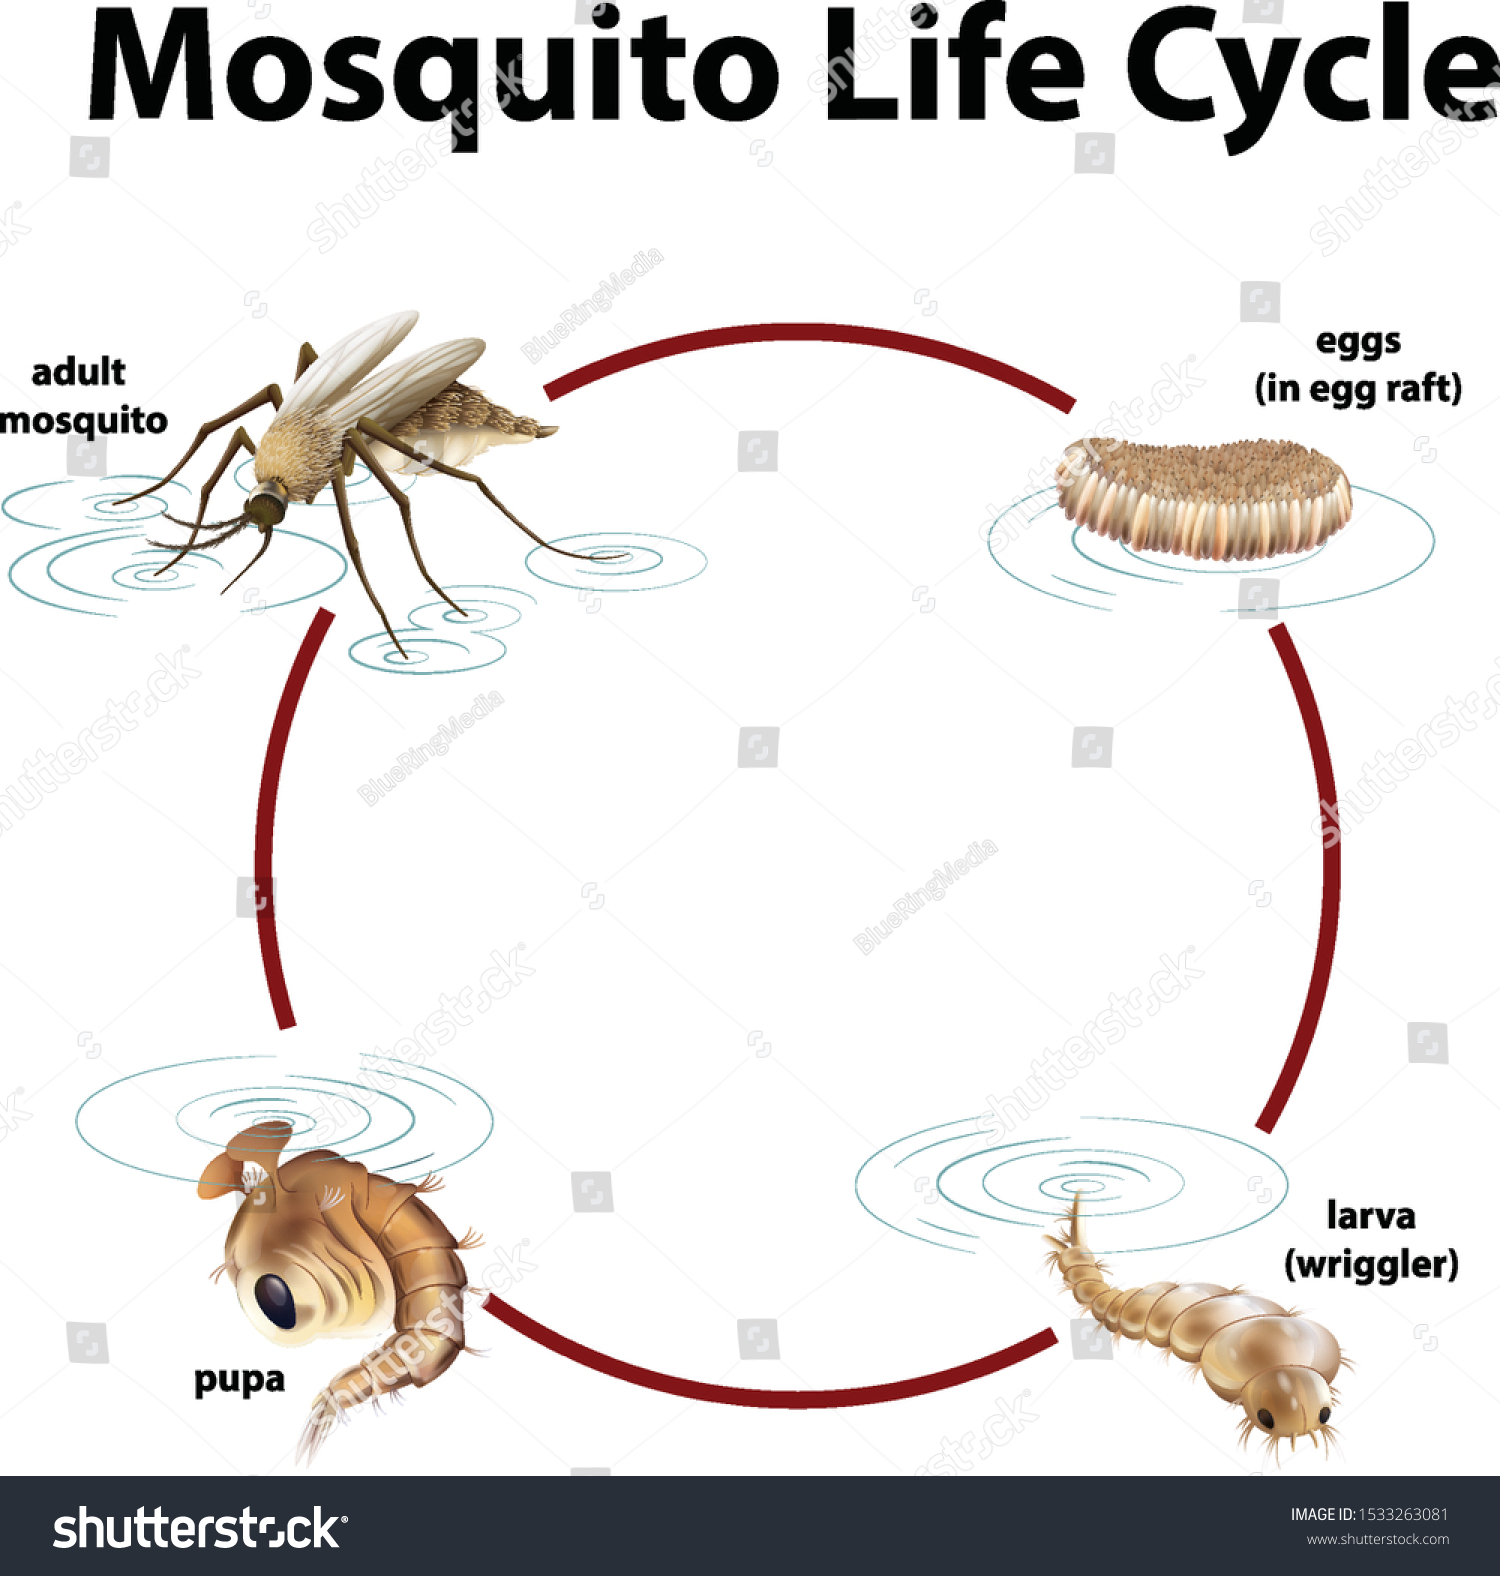 Diagram Showing Life Cycle Mosquito Illustration Stock Vector (Royalty ...